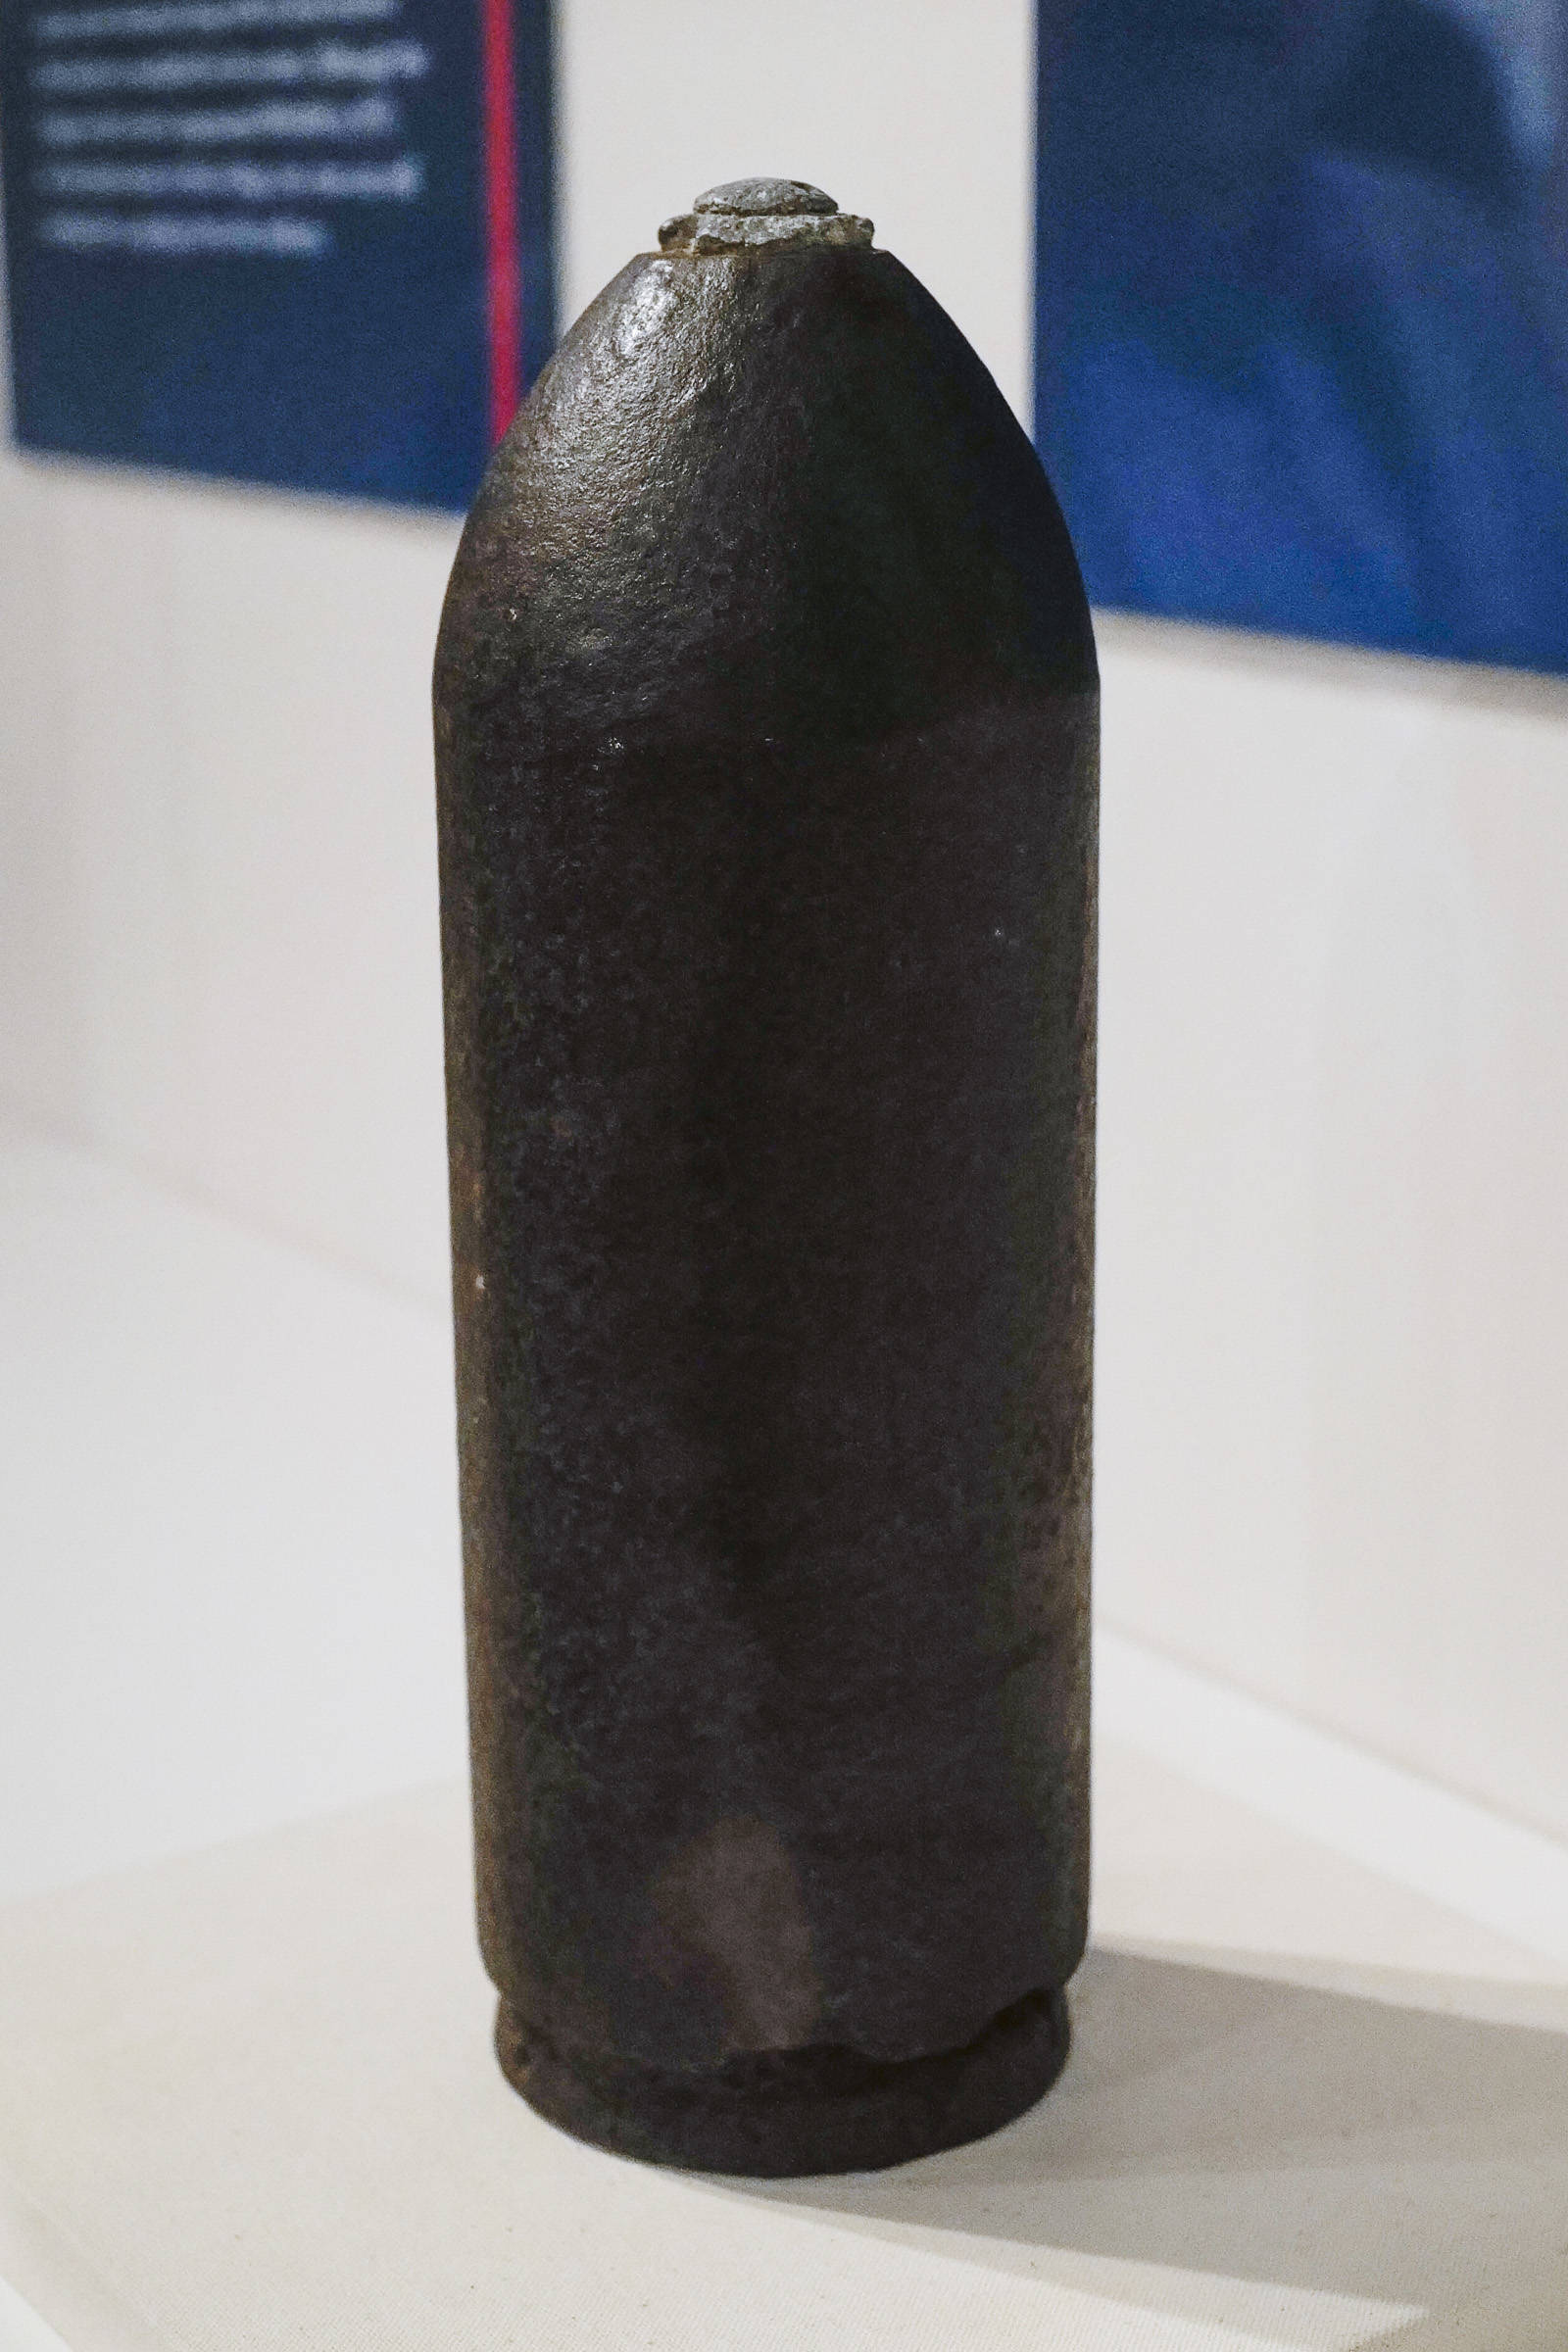 A U.S. Navy shell used in the bombardment of Kake in 1869 by the U.S.S. Saginaw on display in the new temporary exhibit, “War & Peace” in the Sealaska Heritage Institute’s gallery on Friday, Dec. 6, 2019. The exhibit opens Friday, Dec. 6, for Gallery Walk and will be up until February. (Michael Penn | Juneau Empire)